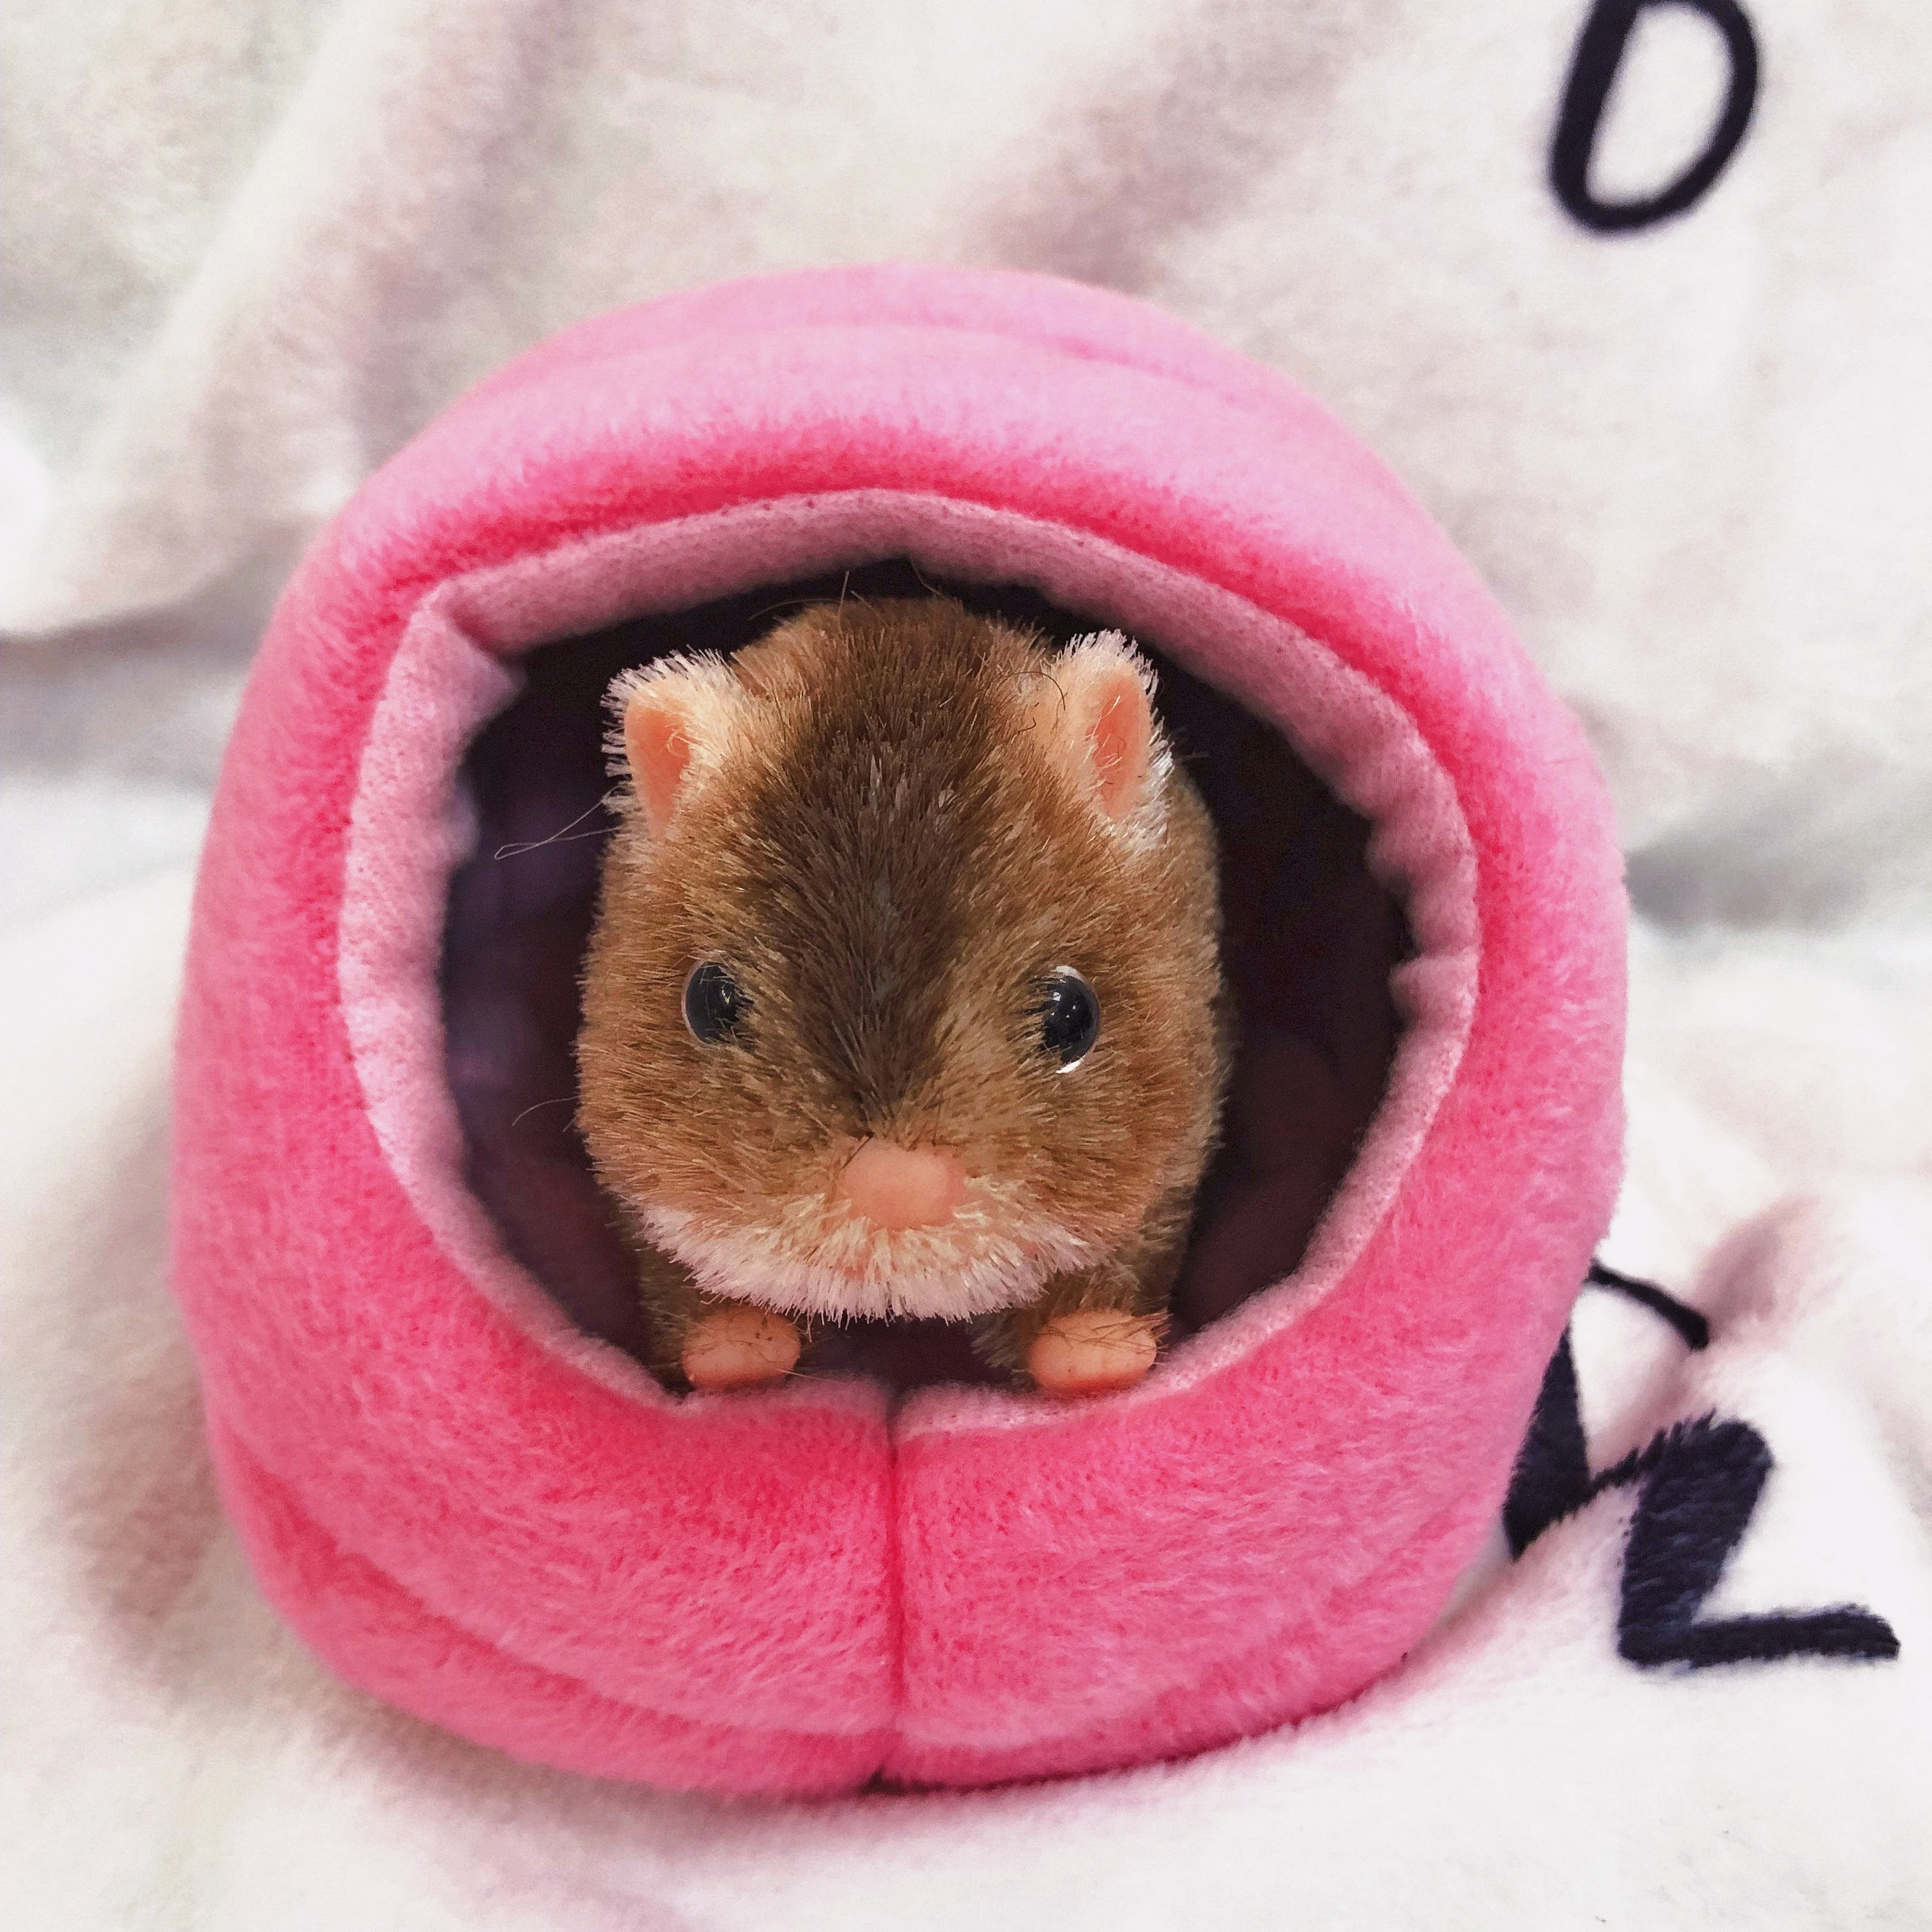 6 Inches Mini Full Silicone Hamster Accessory Soft Lifelike Animal Hamster Doll Painted Miniature Reborn Hamster Gift For Kids